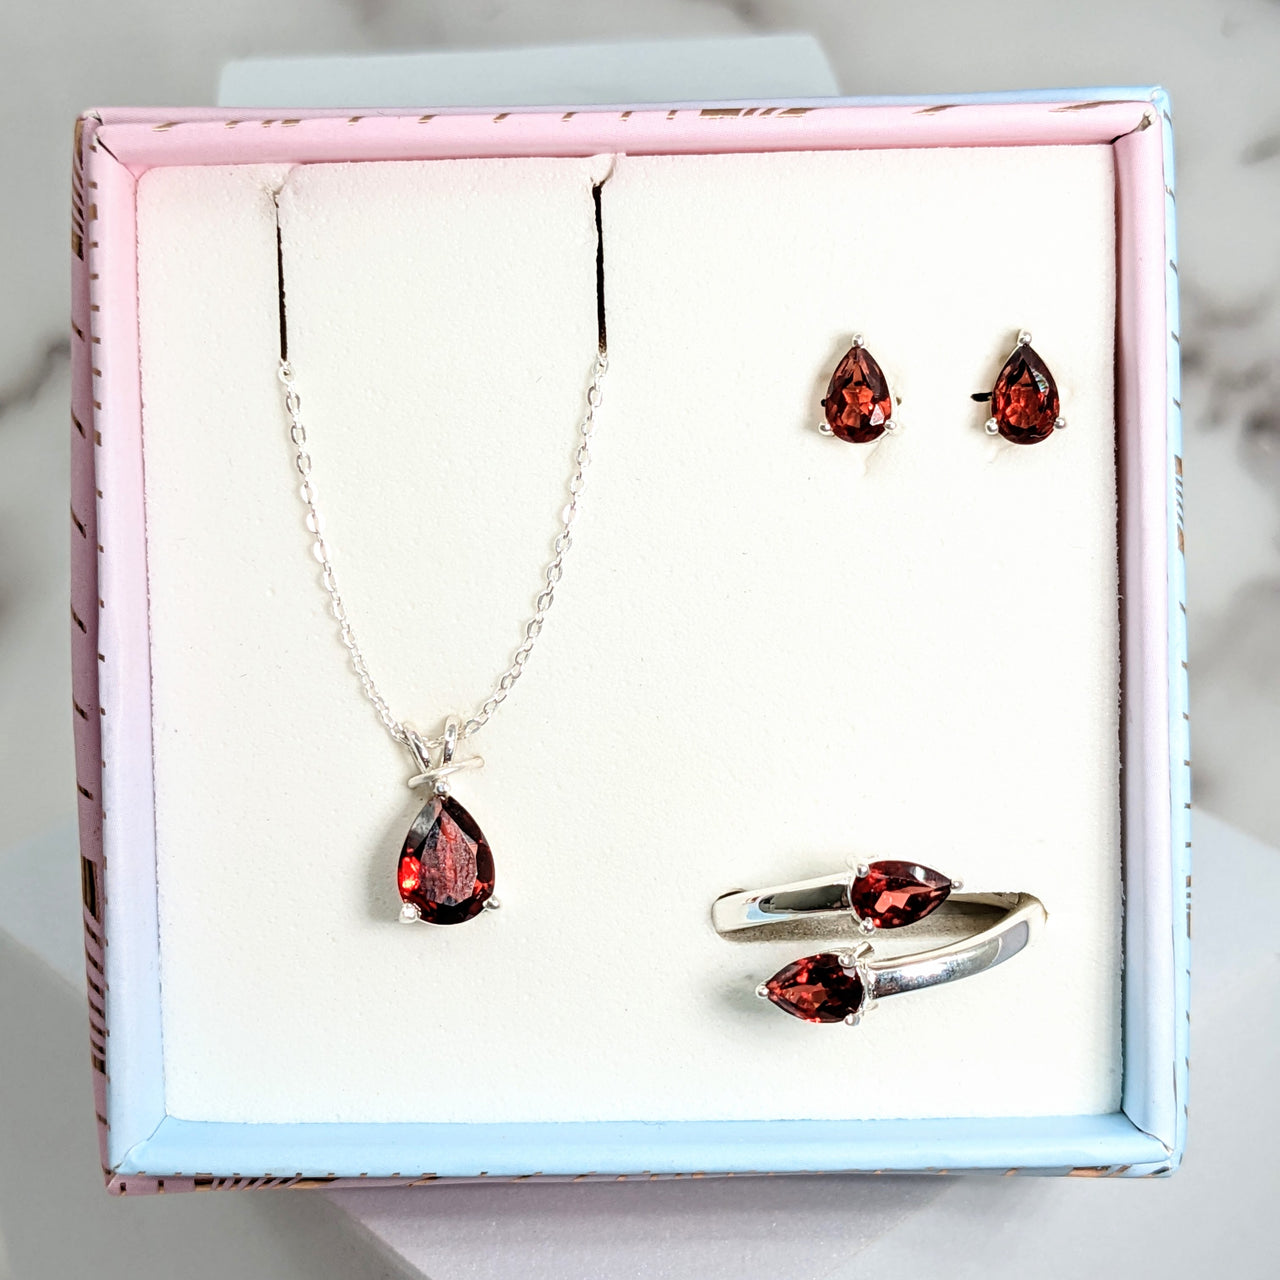 Red Garnet Faceted Jewelry 3 pc Box Set Sterling Silver Earrings, Pendant, Adjustable Ring #LV3204